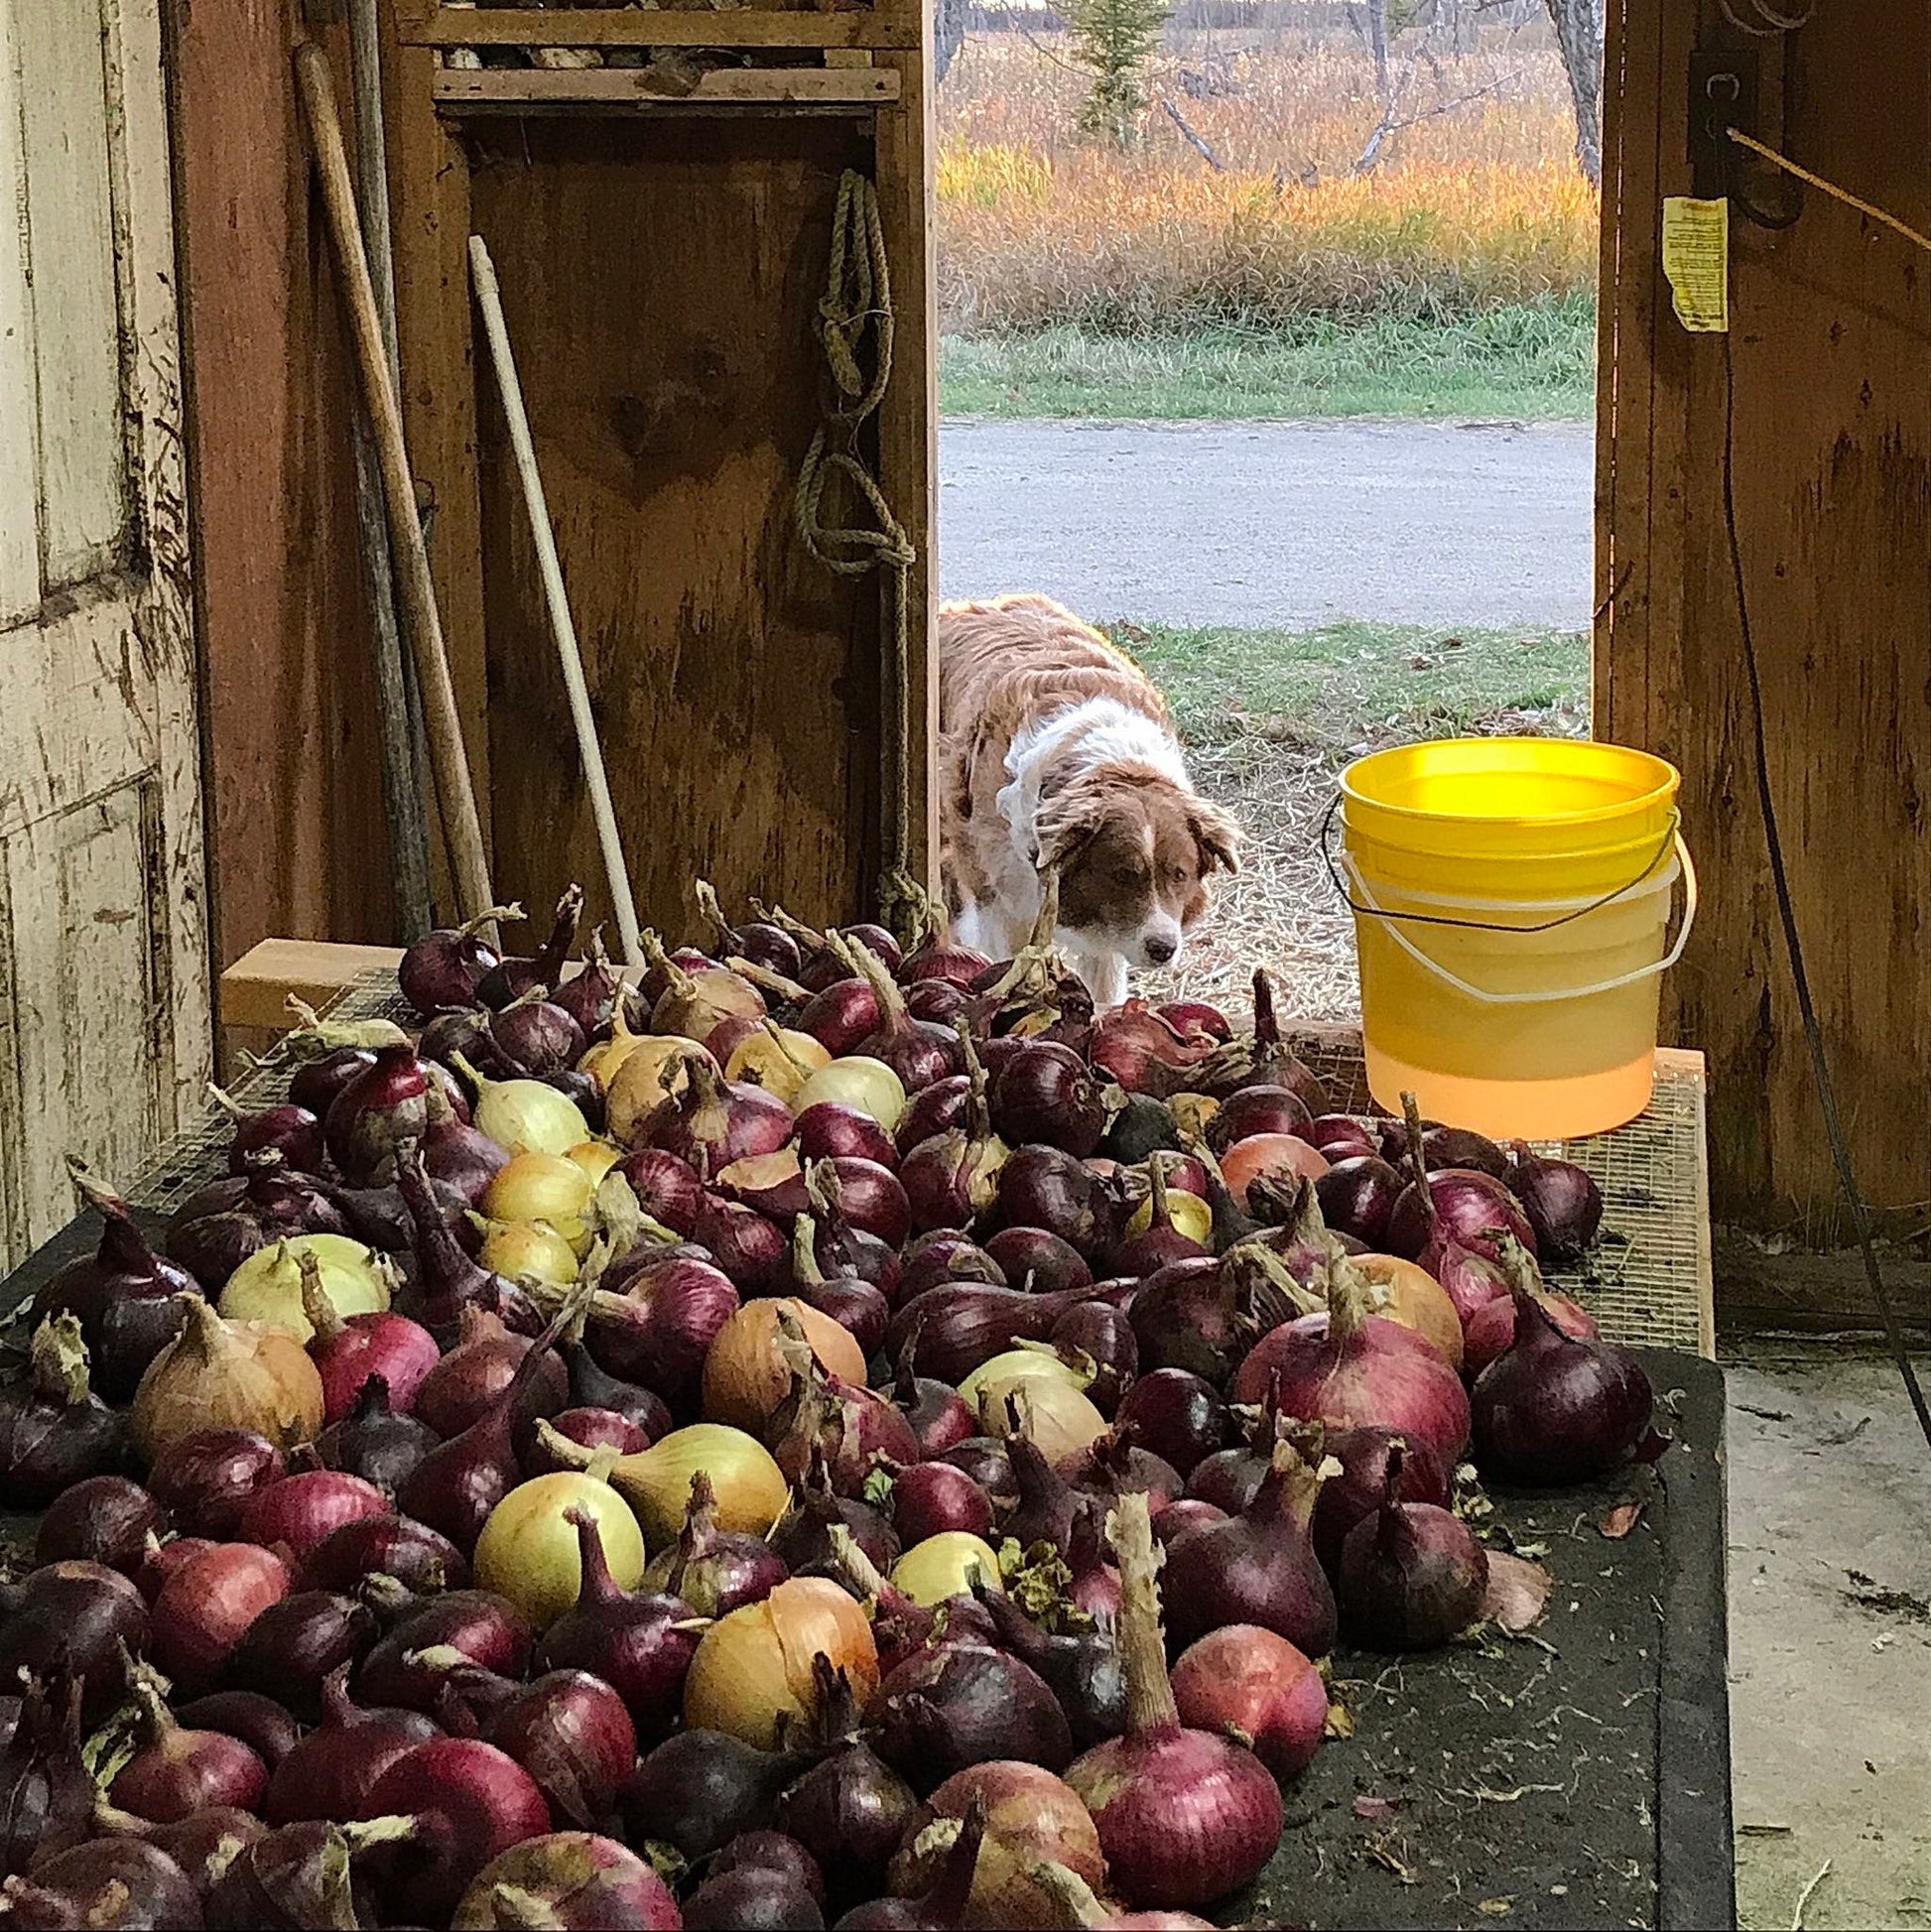 Pile of fully cured red, pink, and yellow onions with a cute farm dog in the background.